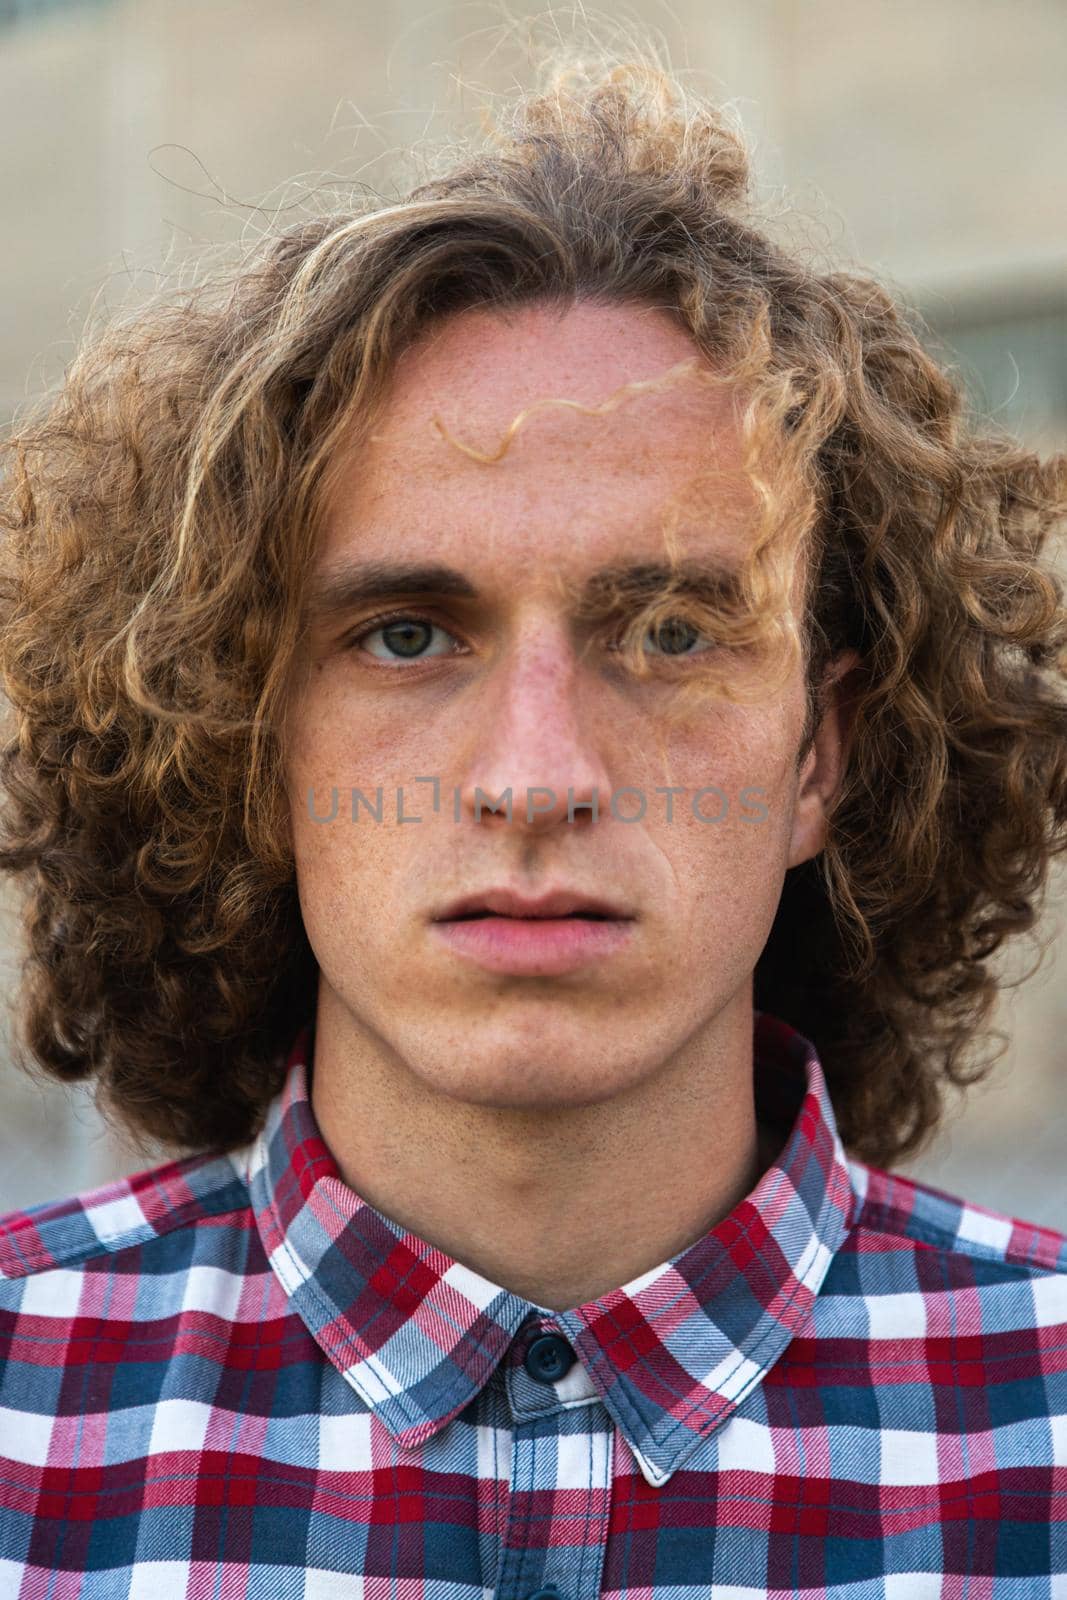 Redhead young caucasian man with curly hair wearing checkered shirt looking at camera. Vertical portrait. by Hoverstock